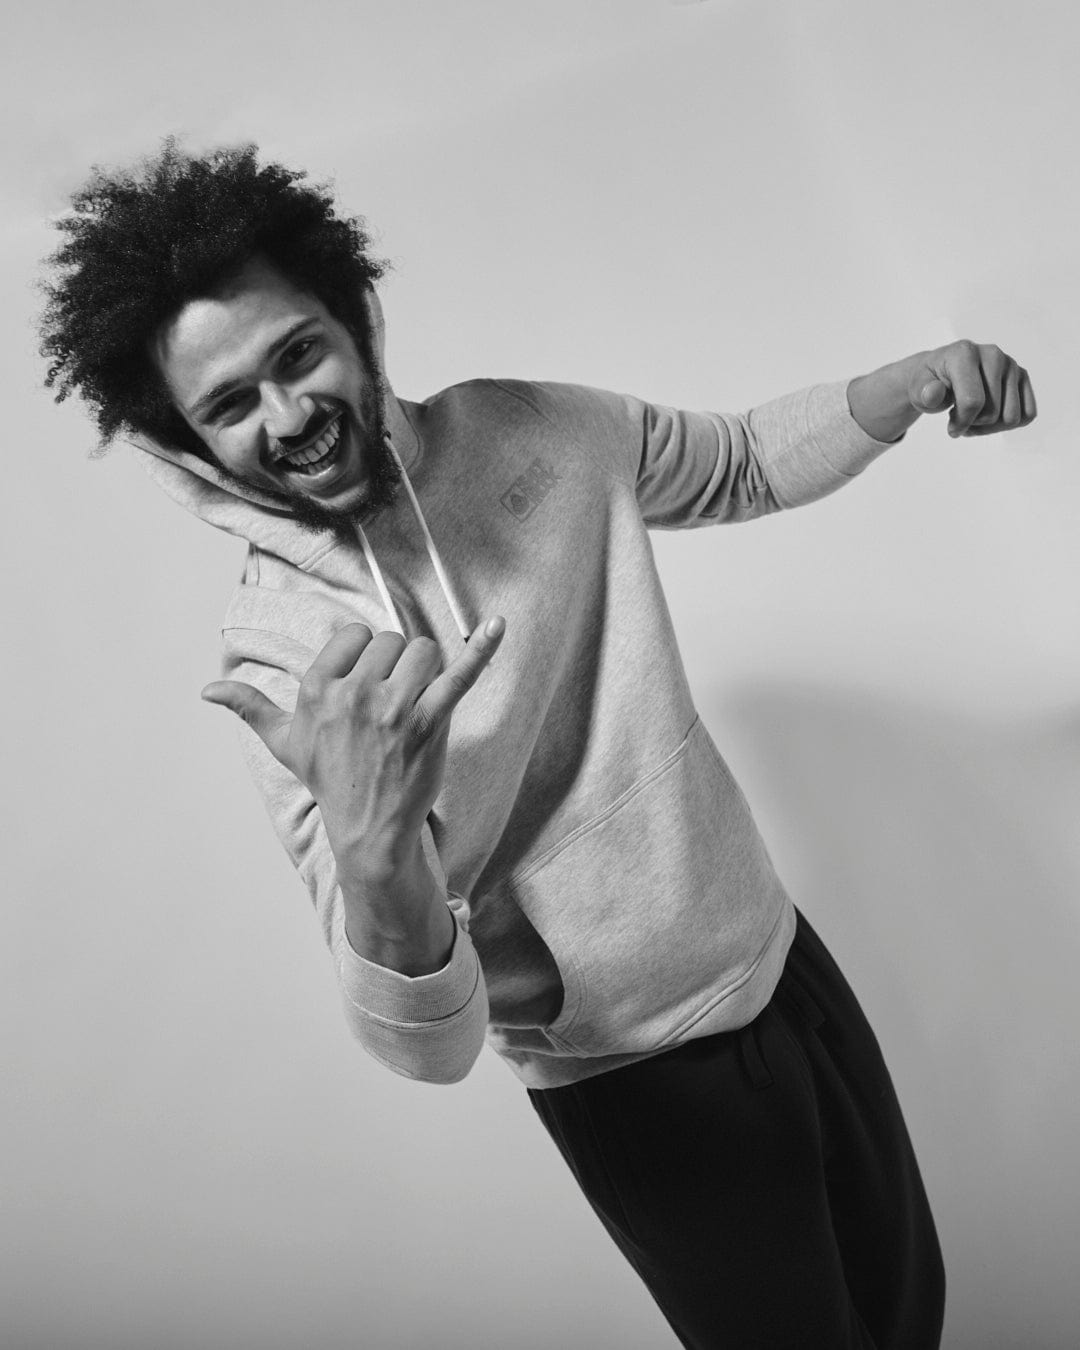 A man with an afro hairstyle joyfully posing in a Saltrock Original - Mens Pop Hoodie - Grey, making a gesture as if he's pretending to play guitar.